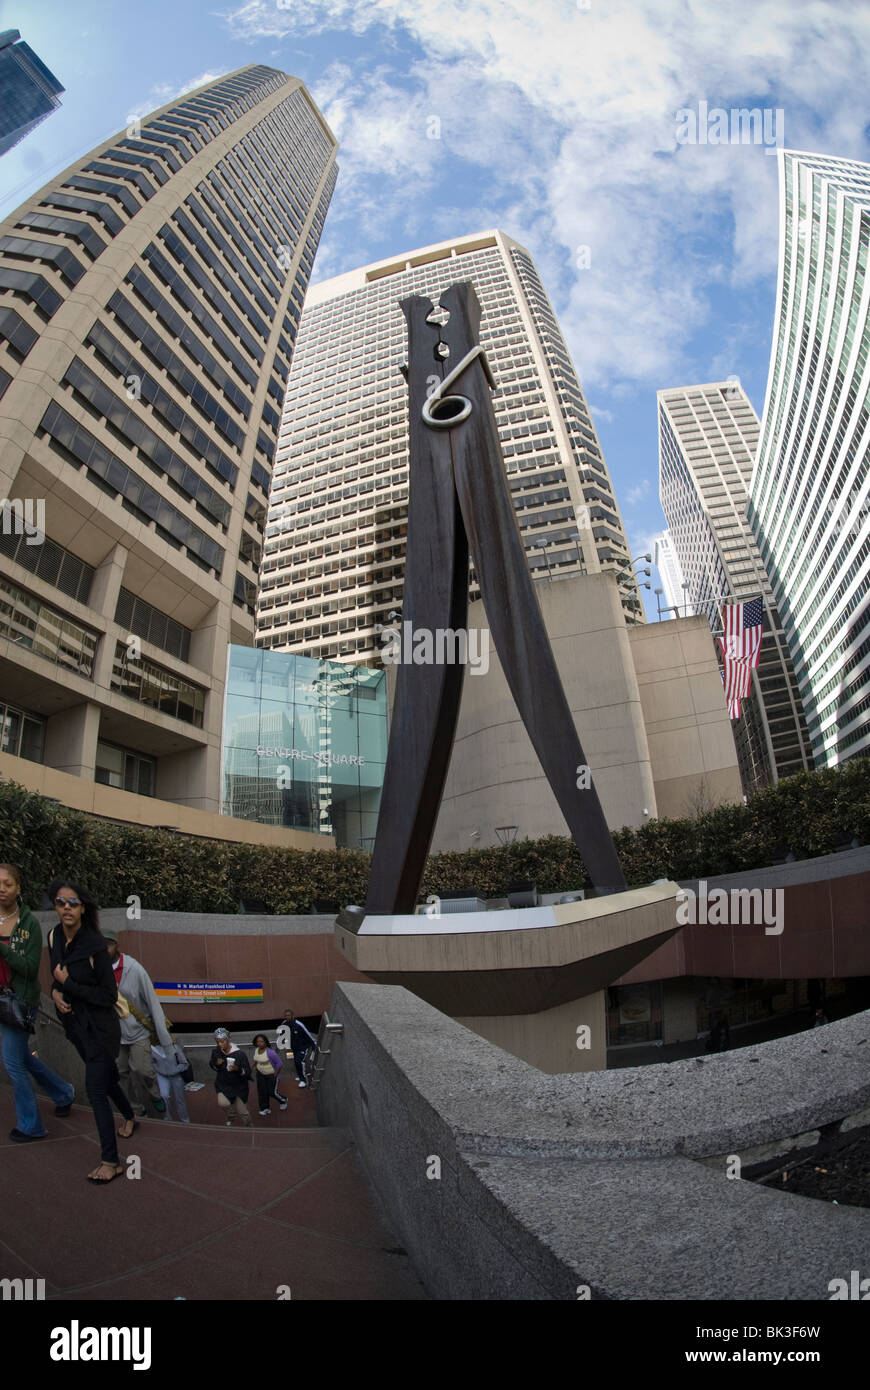 The Clothespin sculpture by Claes Oldenburg in Philadelphia, PA Stock Photo  - Alamy